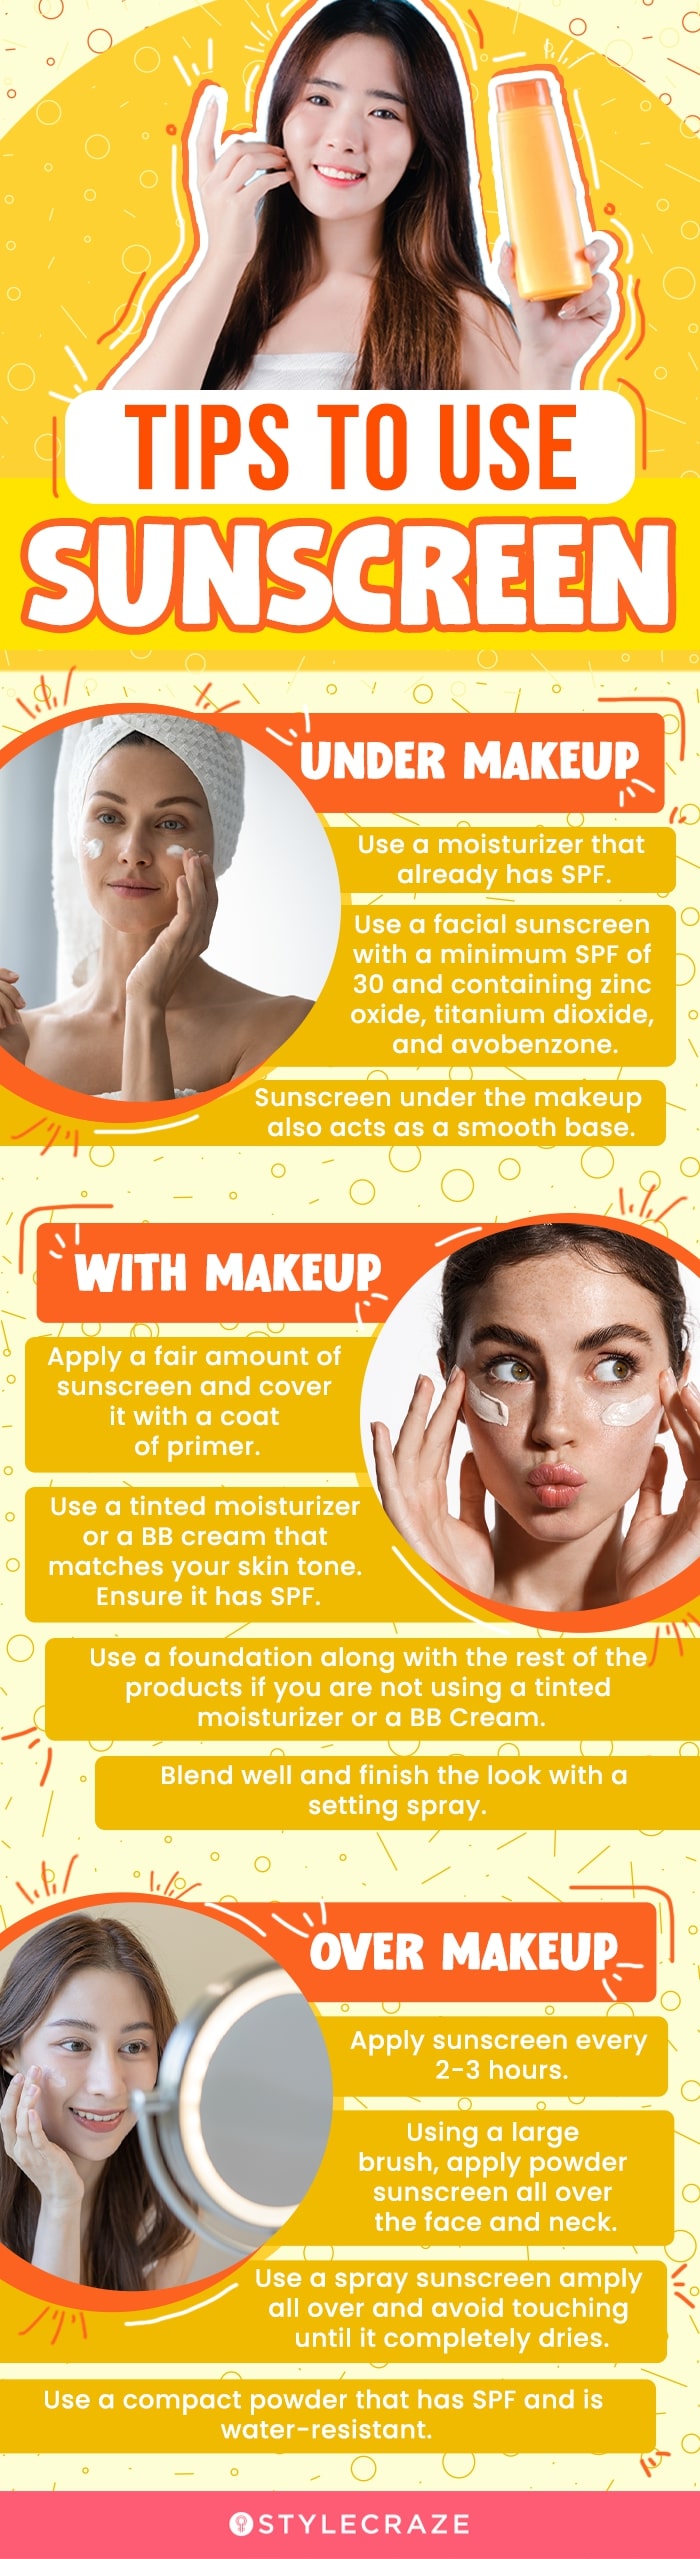 tips to use sunscreen [infographic]